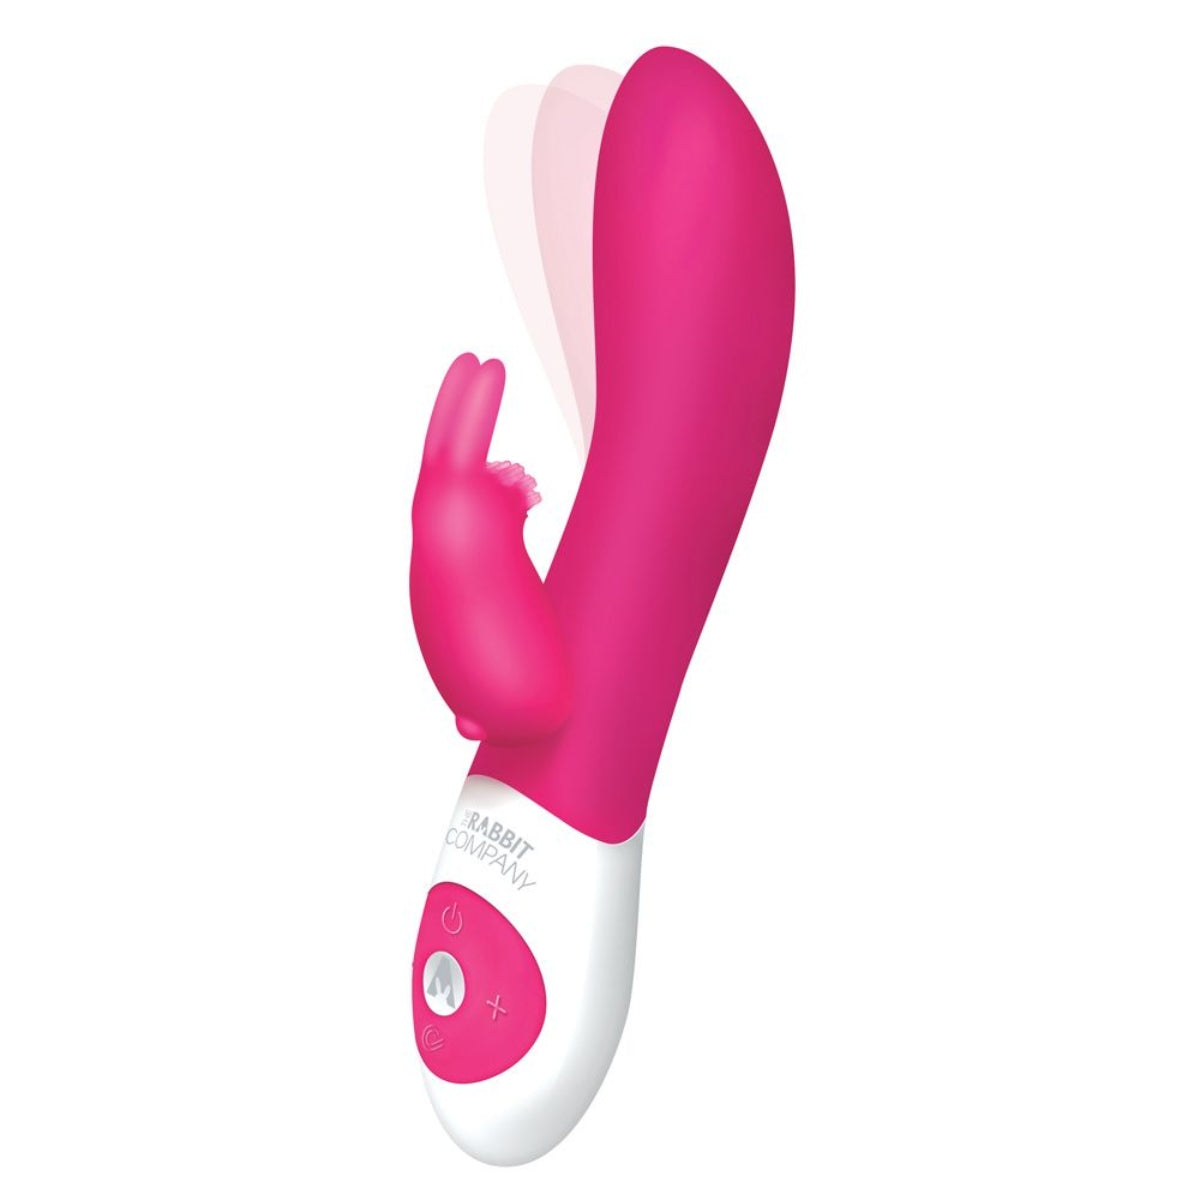 The Rabbit Company The Come Hither Rabbit Vibrator Hot Pink